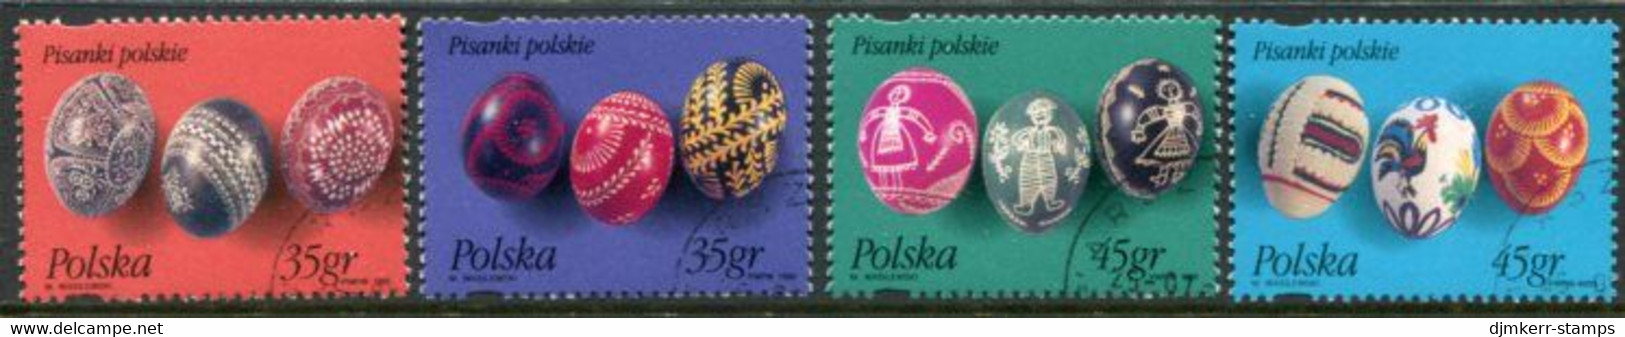 POLAND 1995 Decorated Easter Eggs Used.  Michel 3526-29 - Gebraucht